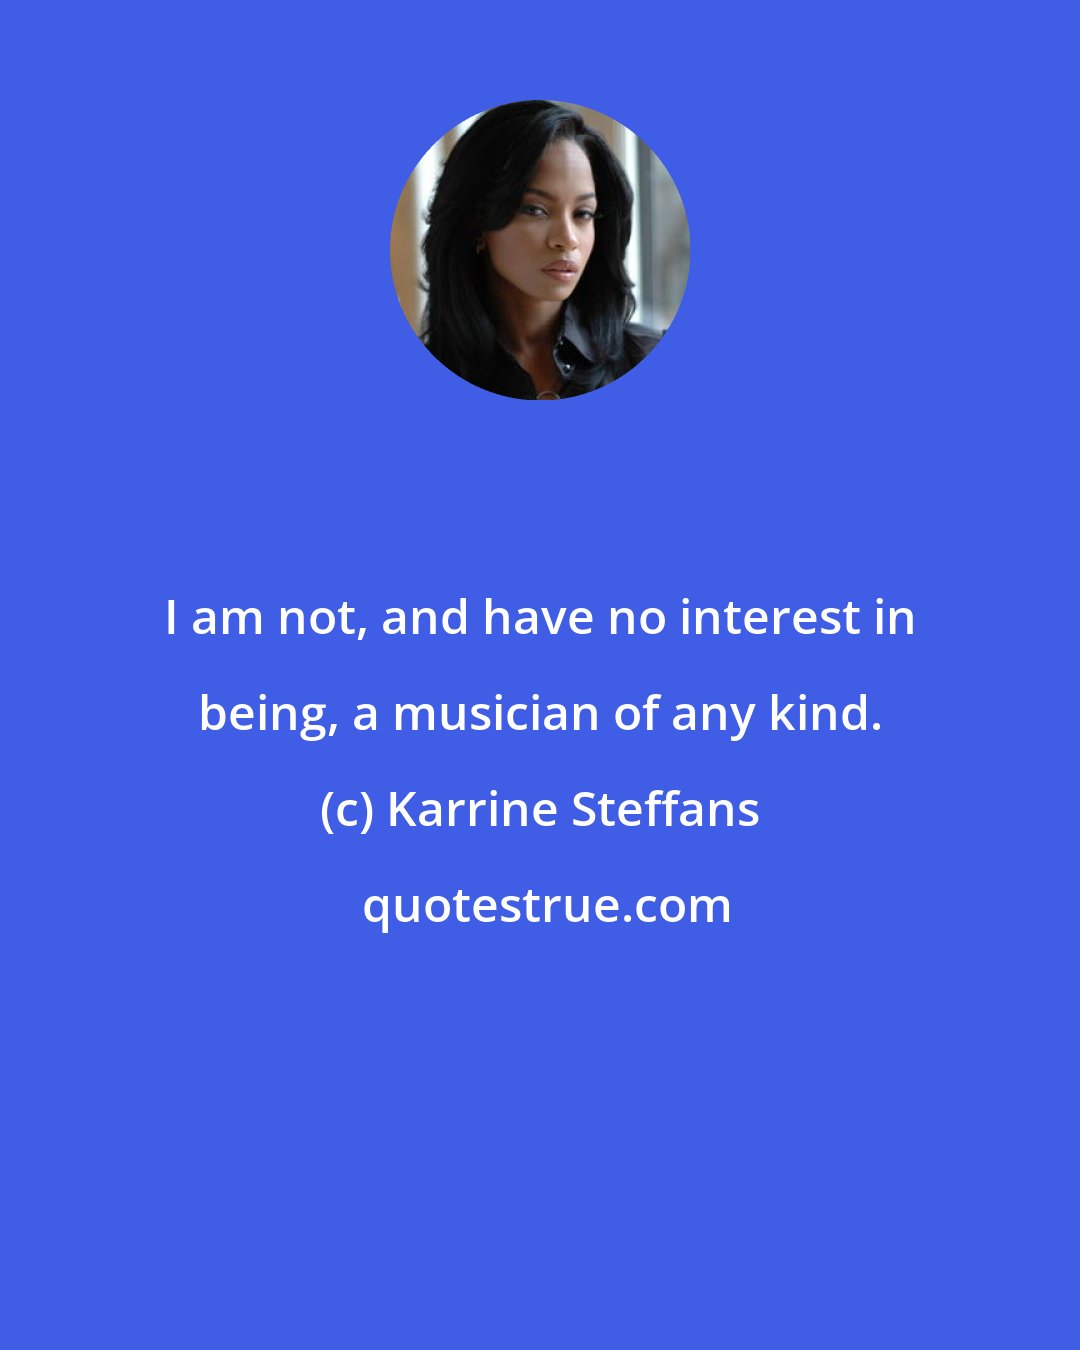 Karrine Steffans: I am not, and have no interest in being, a musician of any kind.